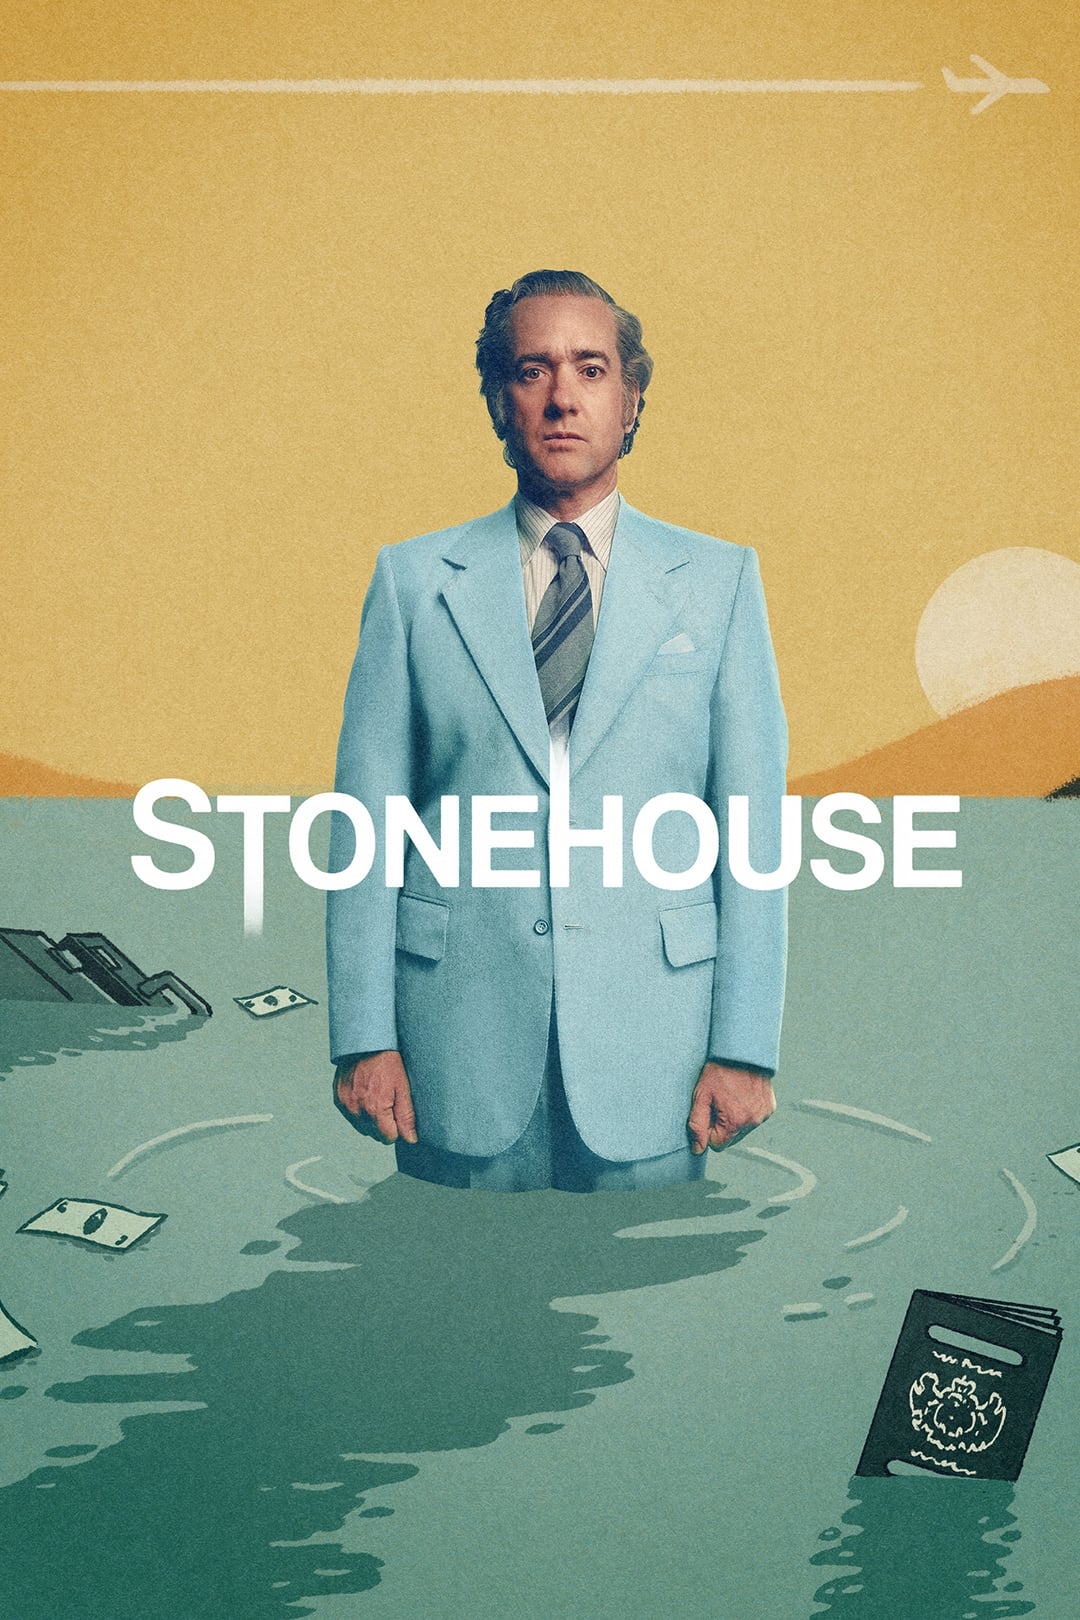 Stonehouse TV Shows About Miniseries